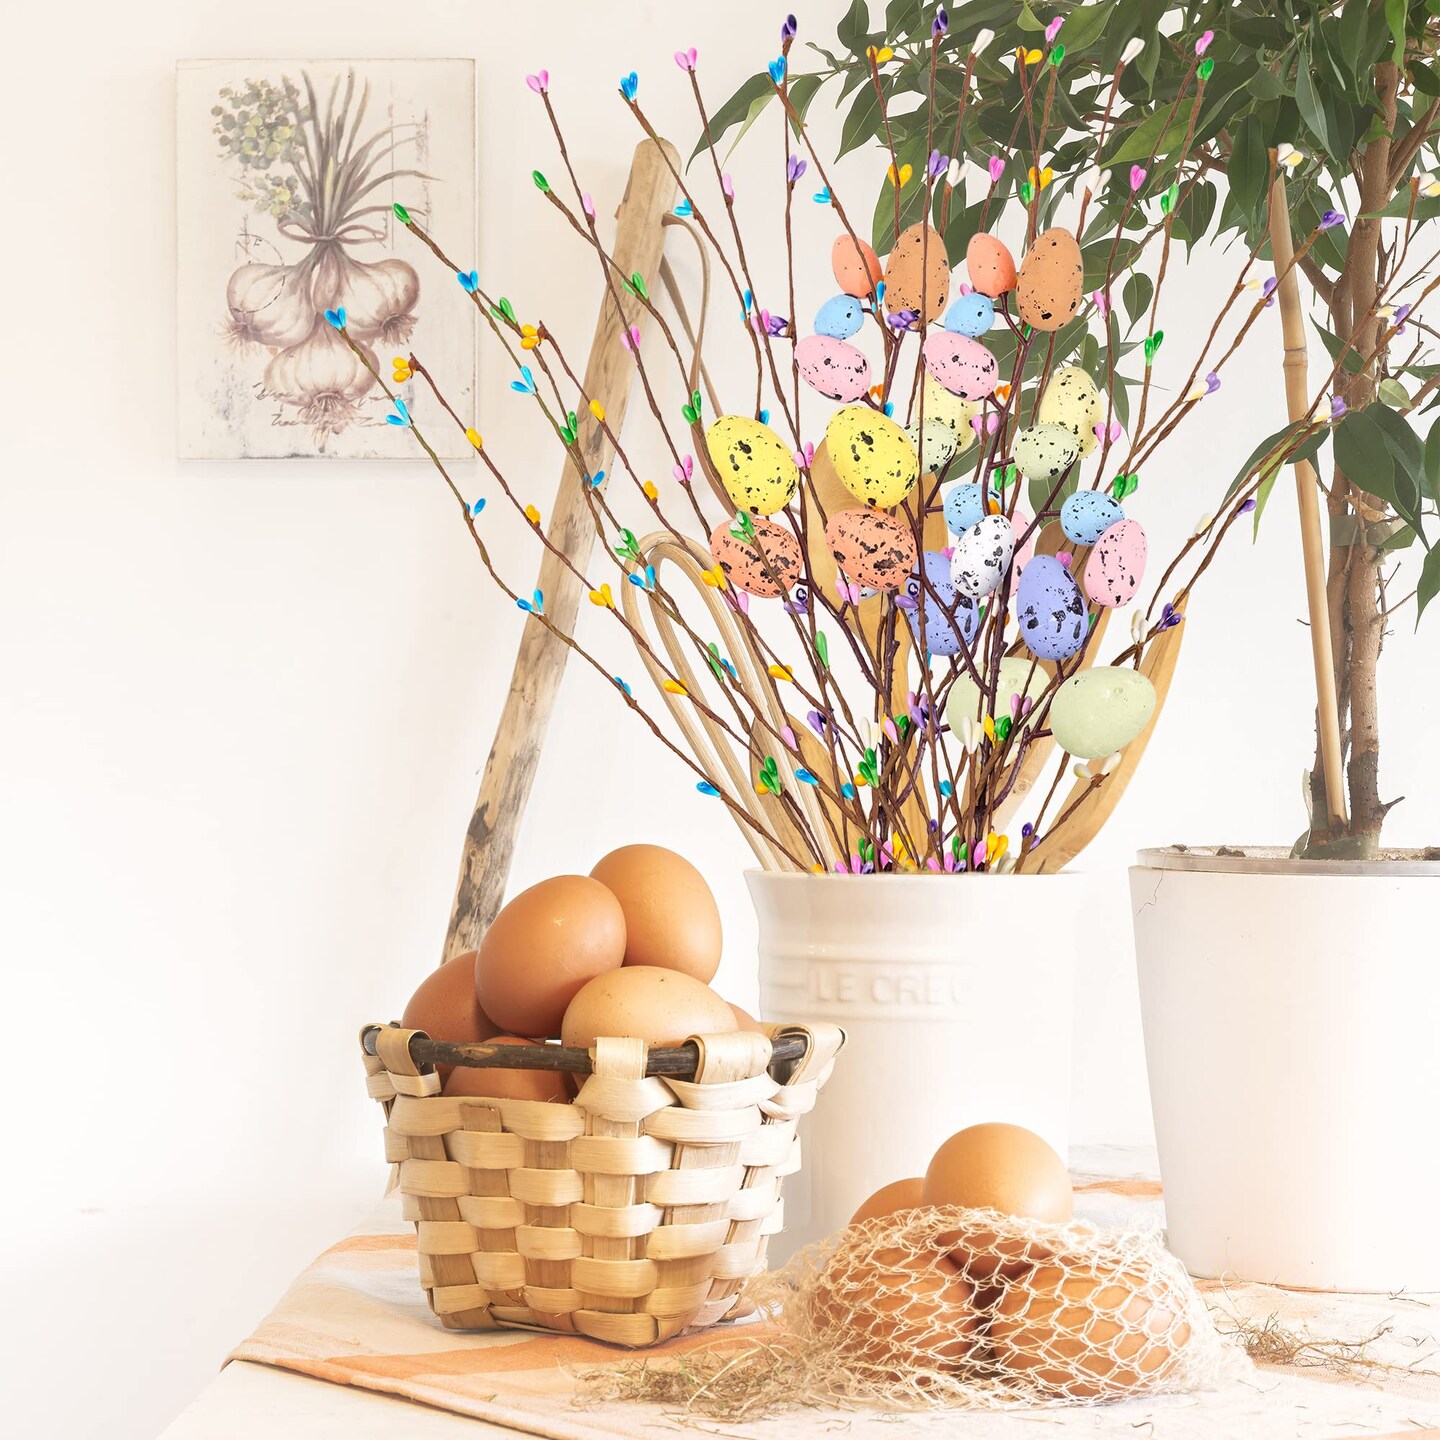 Shitailu Artificial Easter Spray Vine with Pastel Easter Eggs and Berries- Decorative Spring Floral Stems-Easter Egg Twig Branches for Floral Arrangement-Centerpiece Wreath Decoration (26 Pcs)